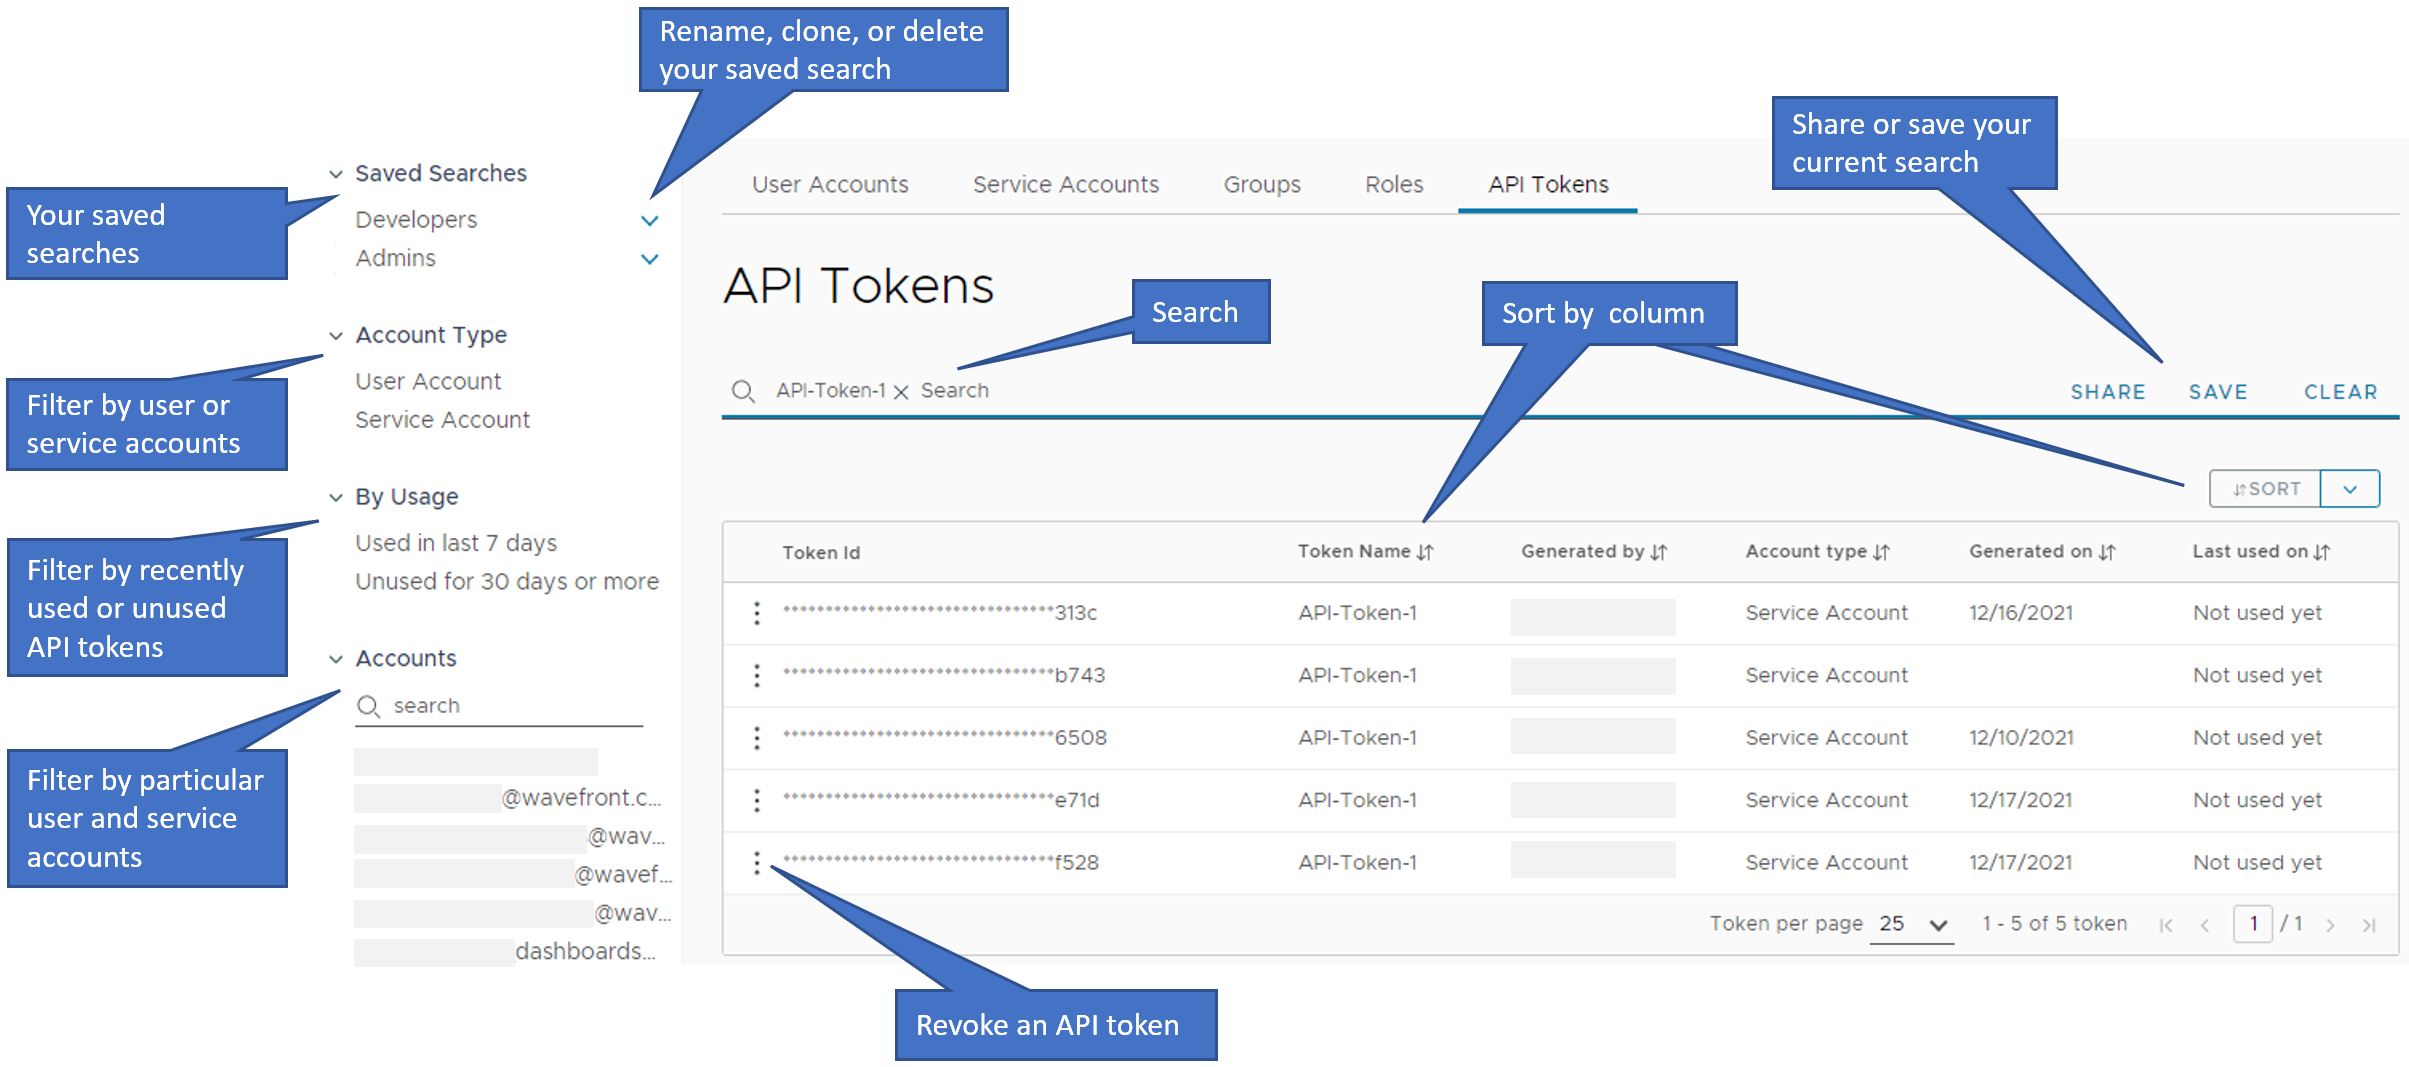 The API Tokens page shows the tokens table, the search field above the table, and the preconfigured filters and the saved searches in the left panel